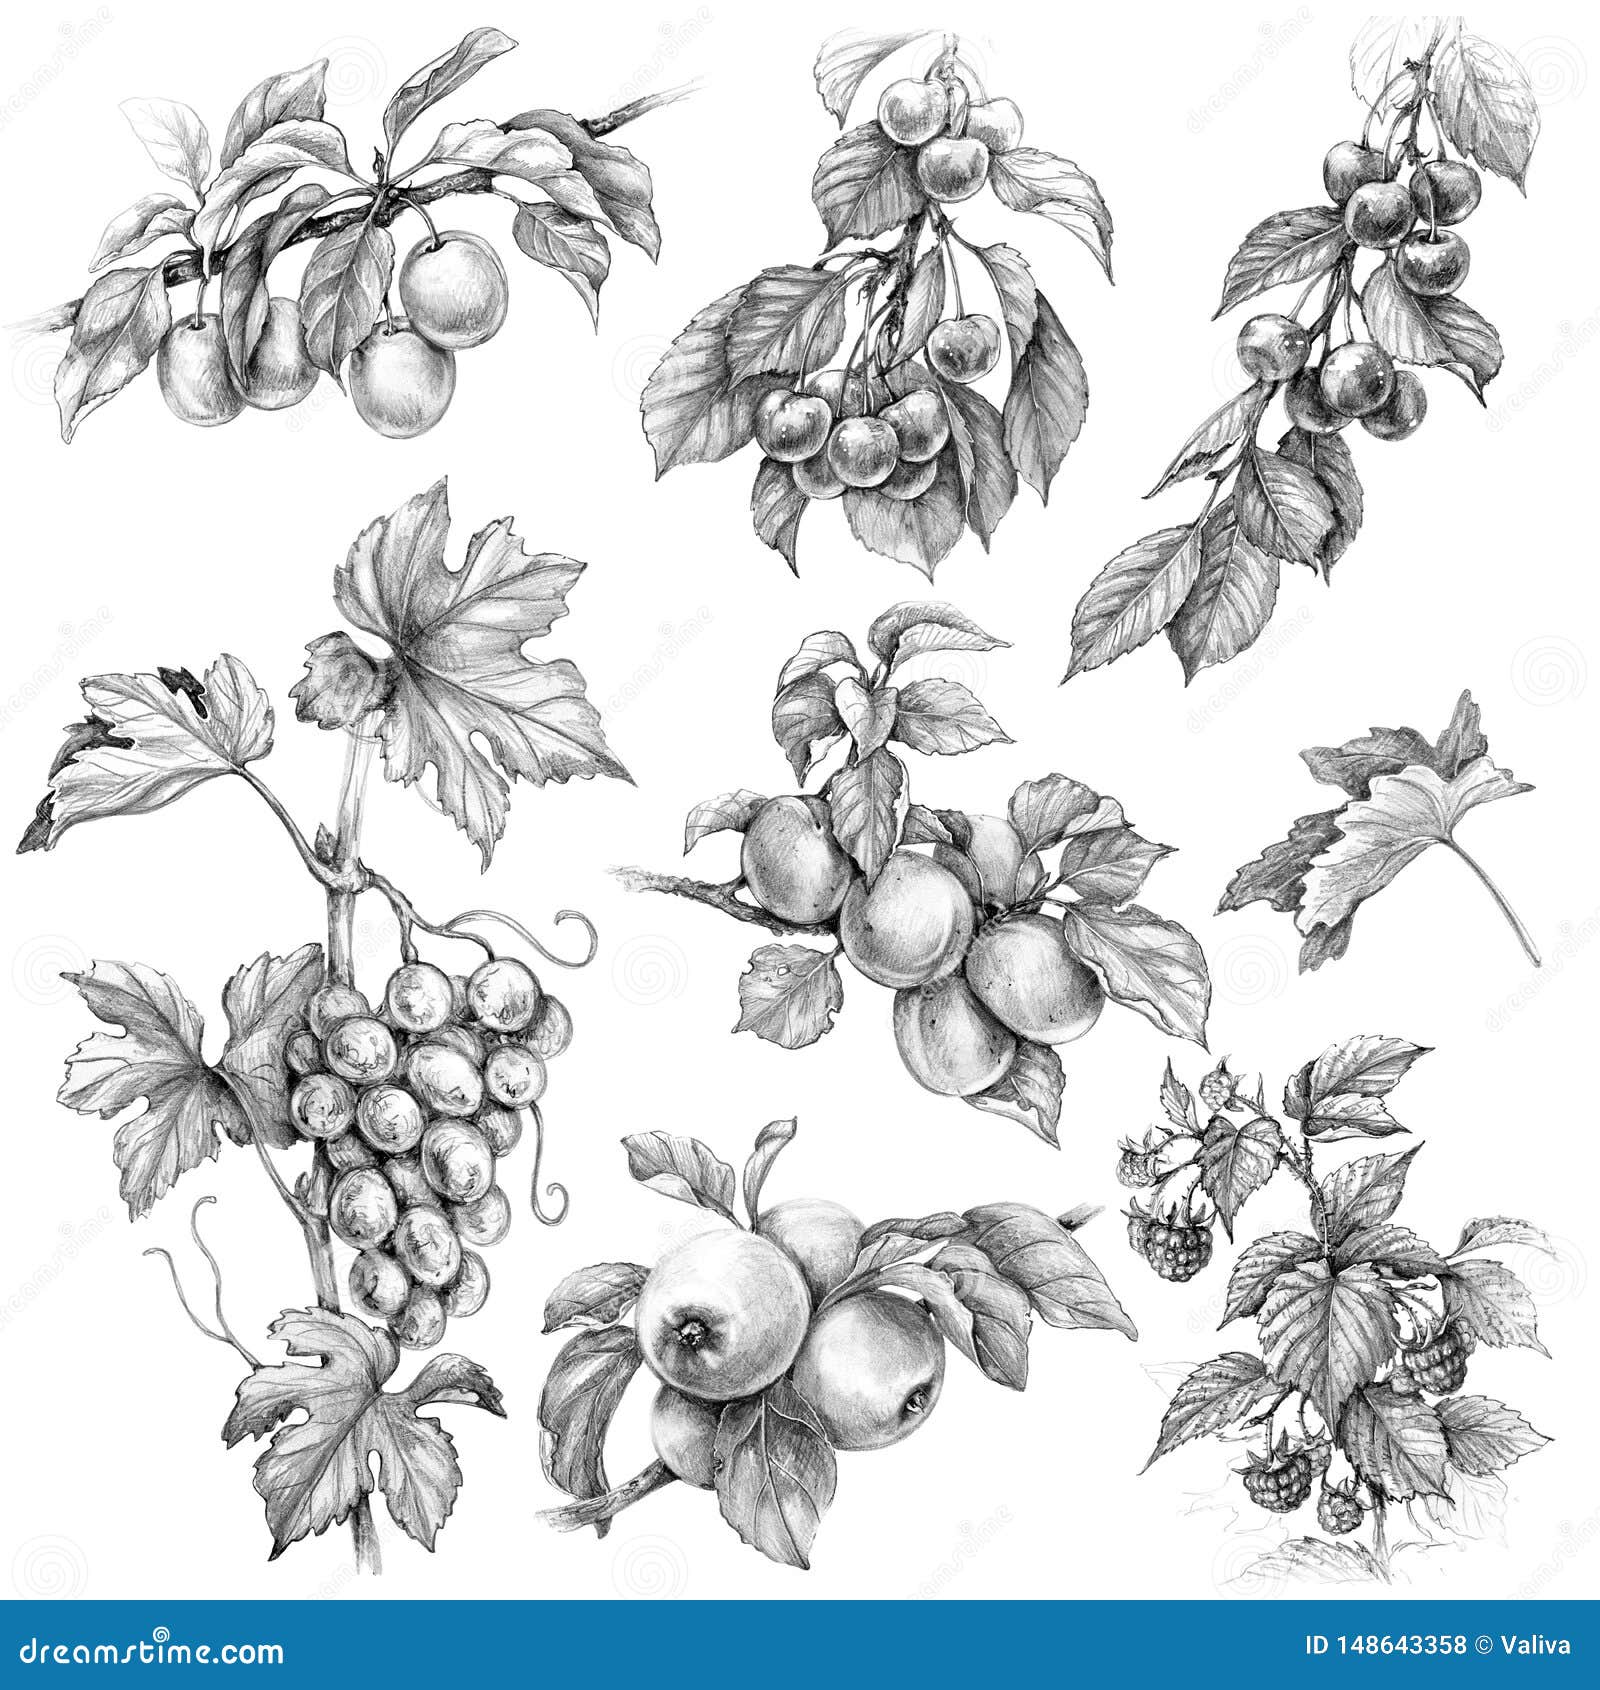 Ink sketch of grapes Banner template hand drawn vector illustration of  grapes vine sketch  CanStock